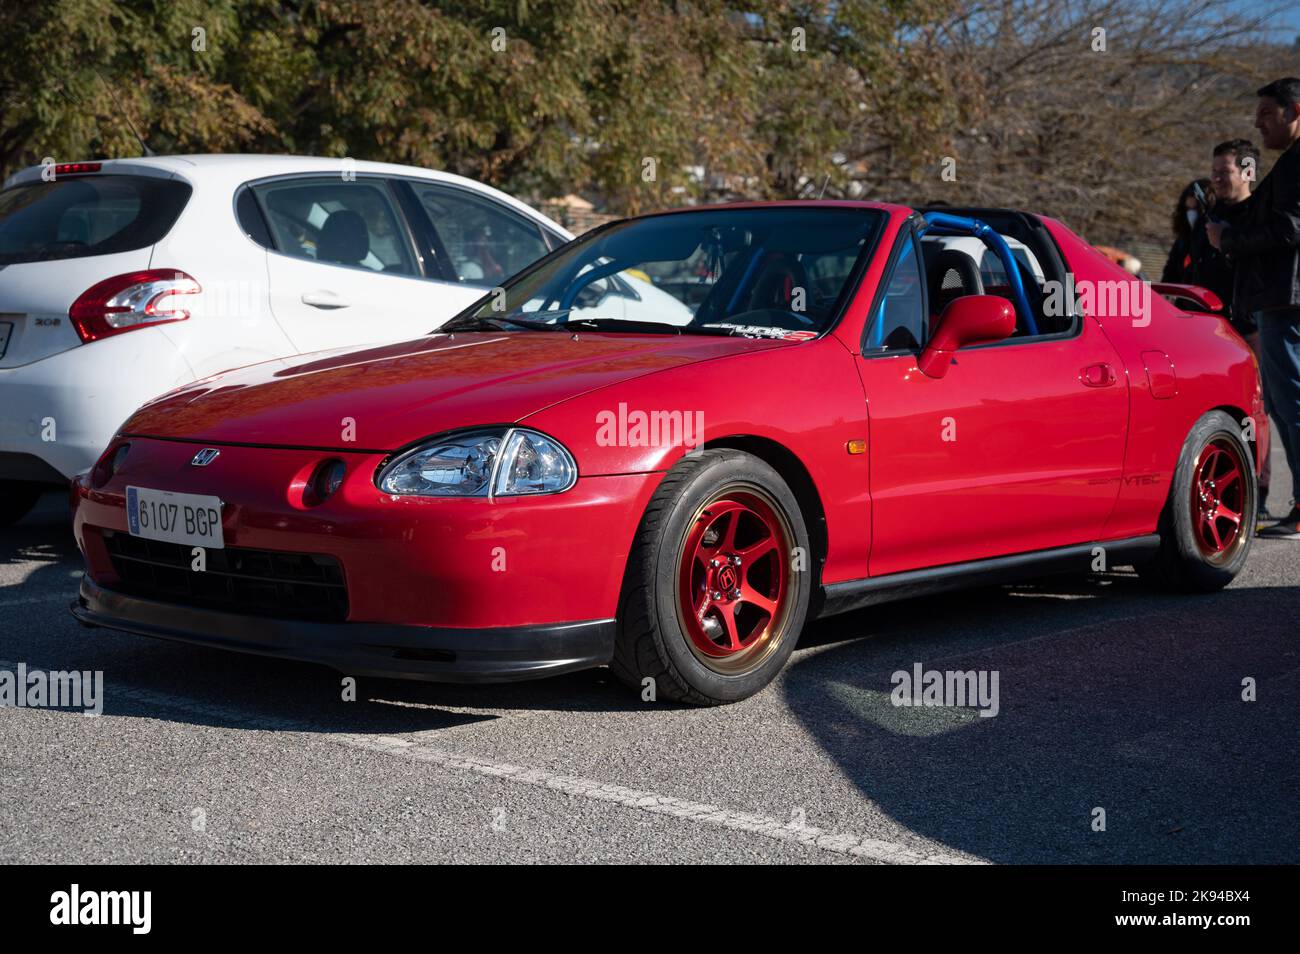 A tuned and improved red Honda CRX Del Sol car Stock Photo